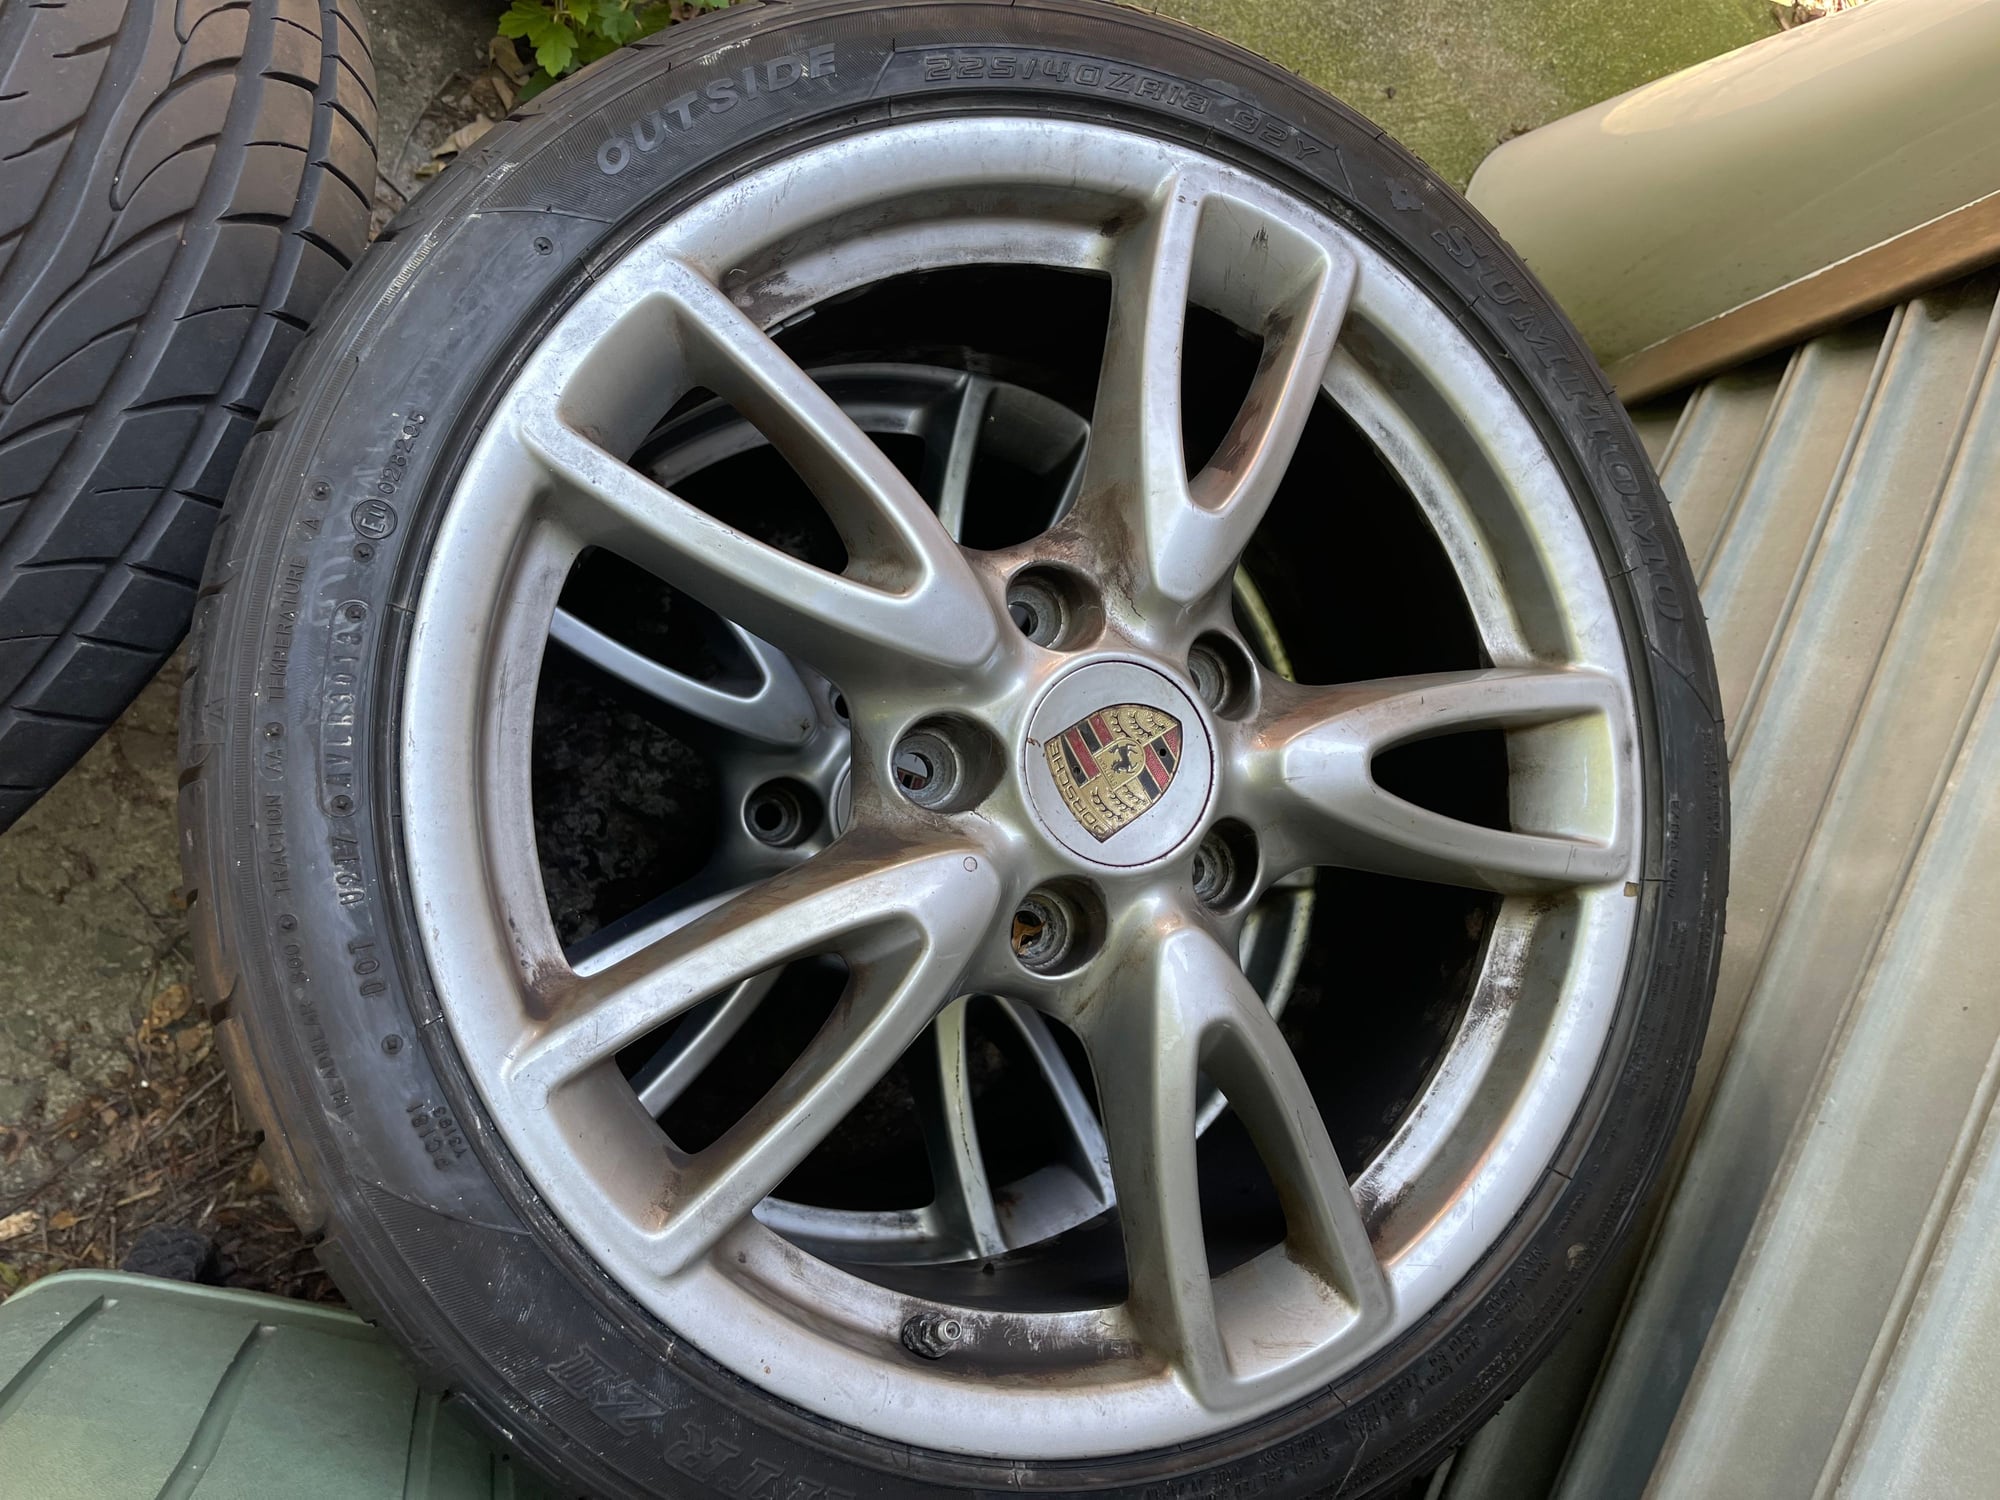 Wheels and Tires/Axles - Porsche 911 rims for sale 18  with decent rubber - Used - 1999 to 2019 Porsche 911 - Staten Island, NY 10305, United States